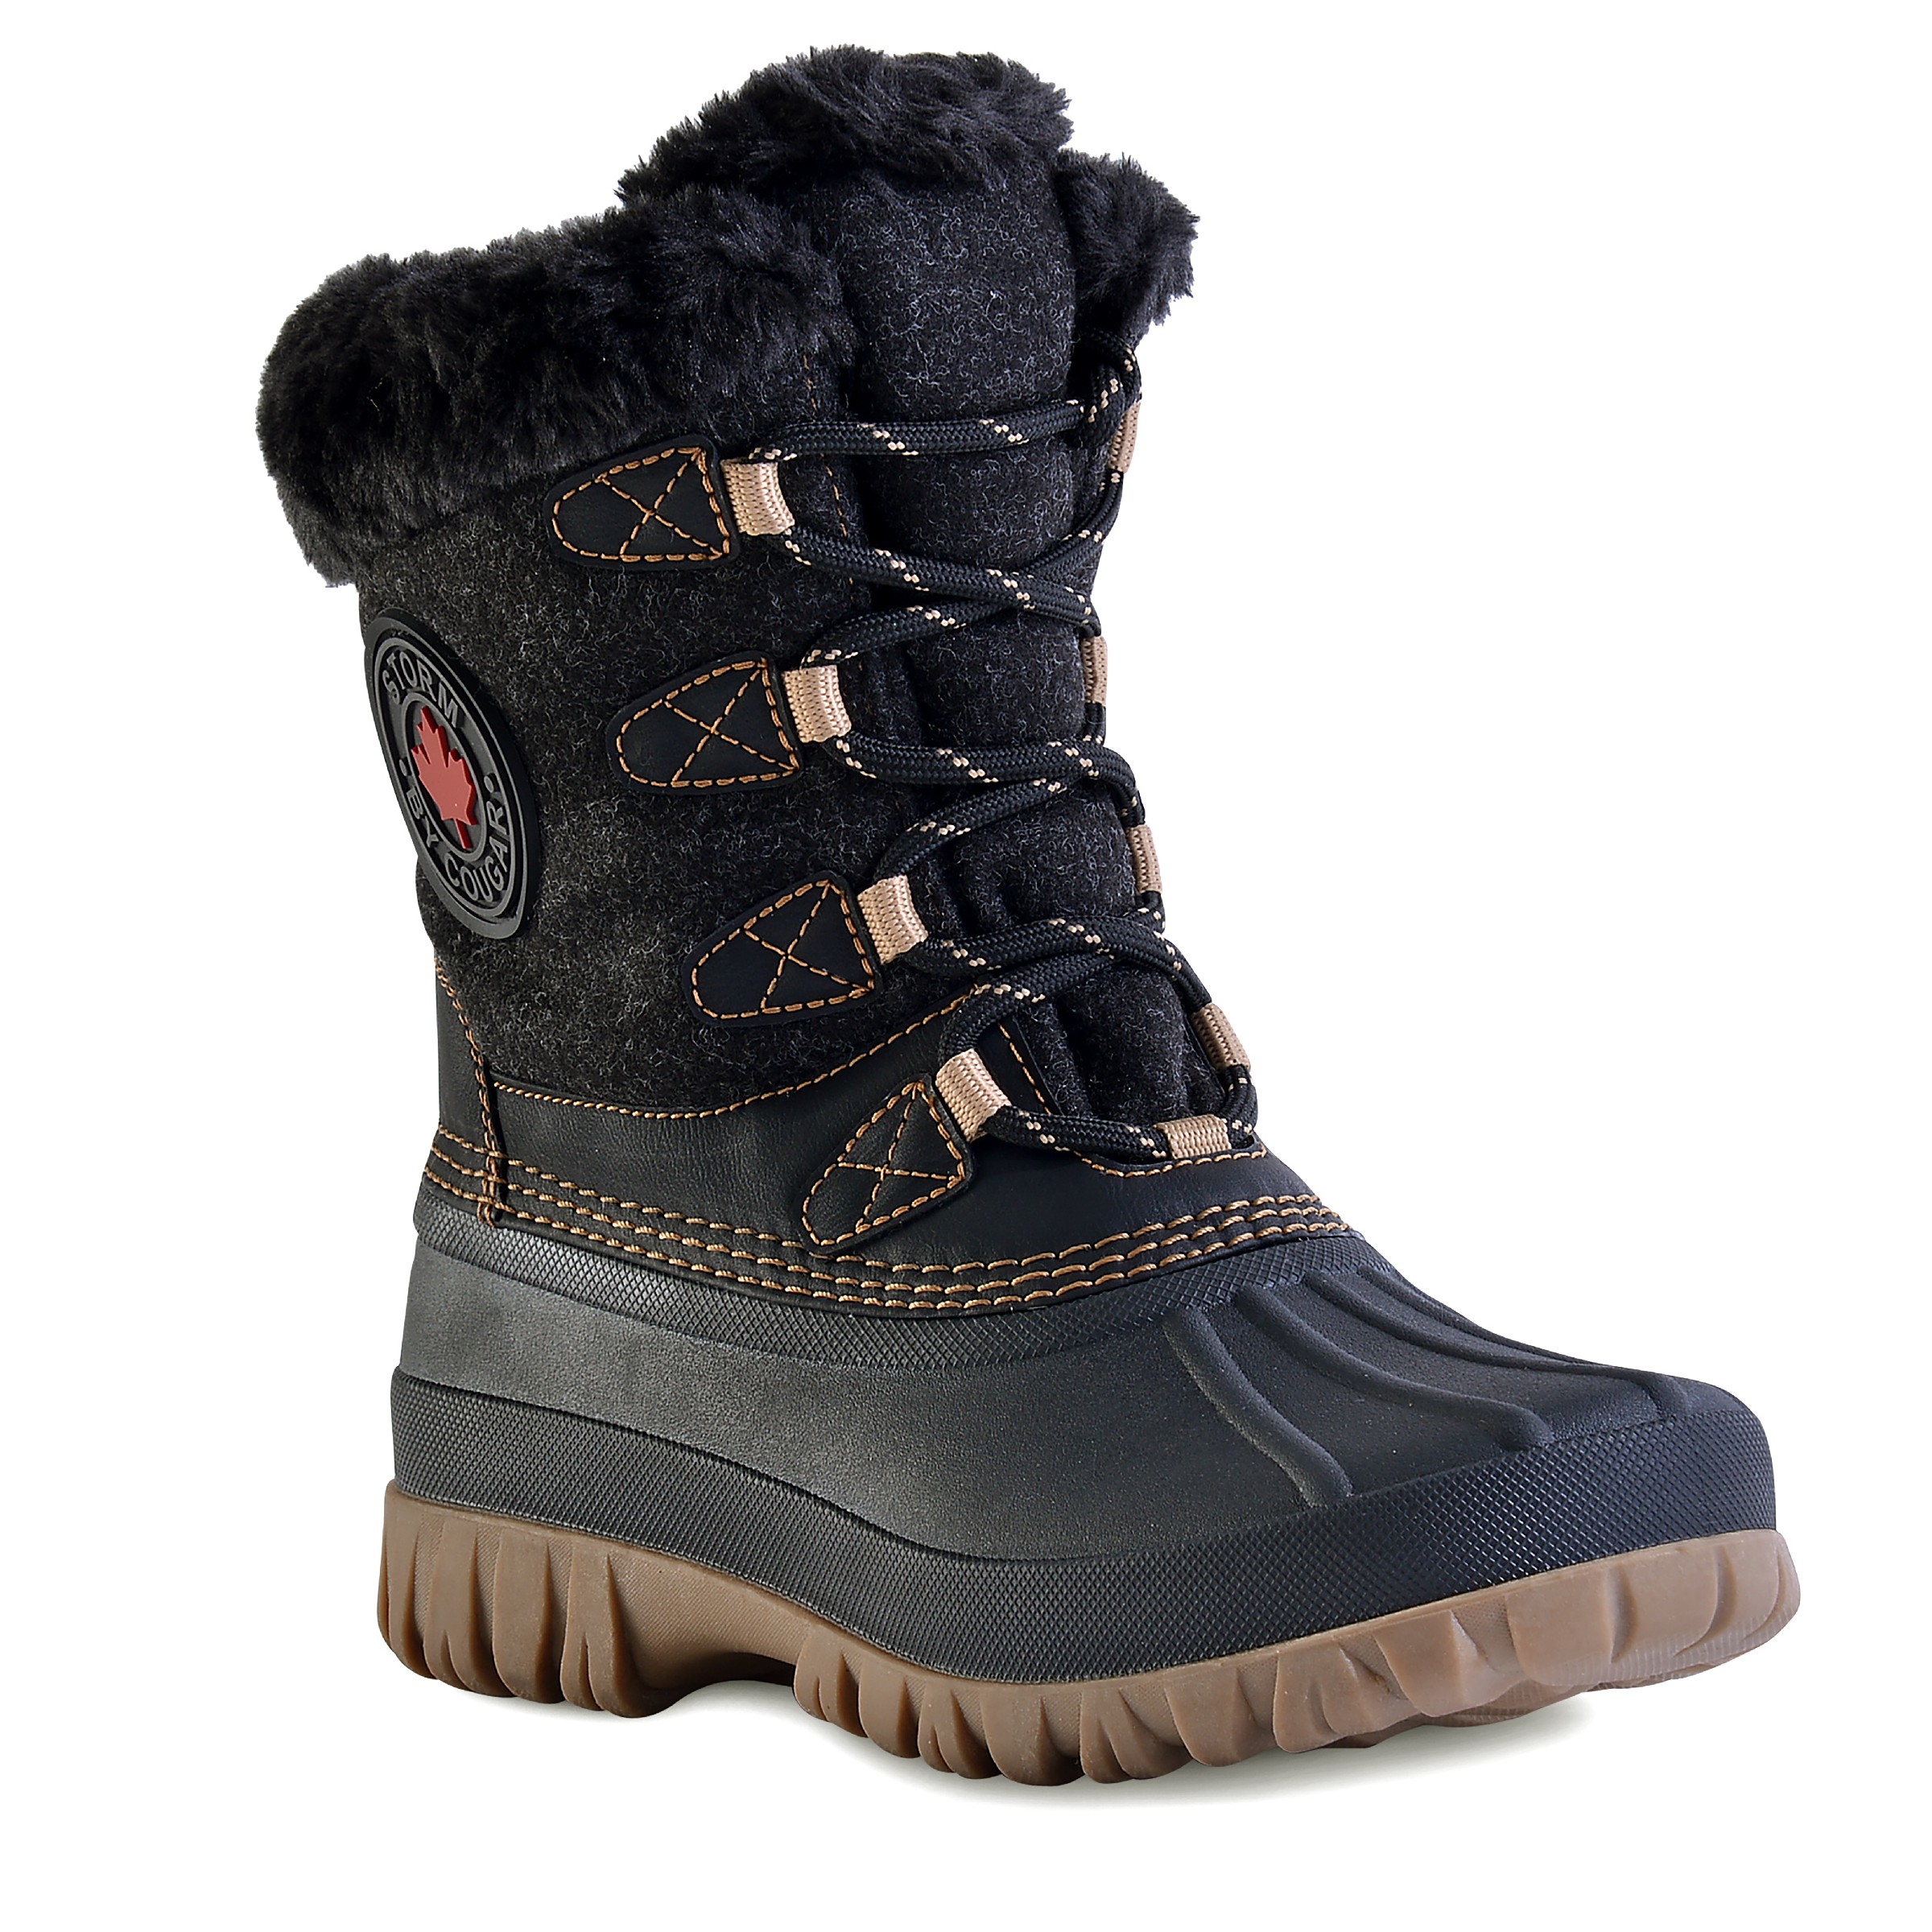 Women's Cozy Cold Weather Boot